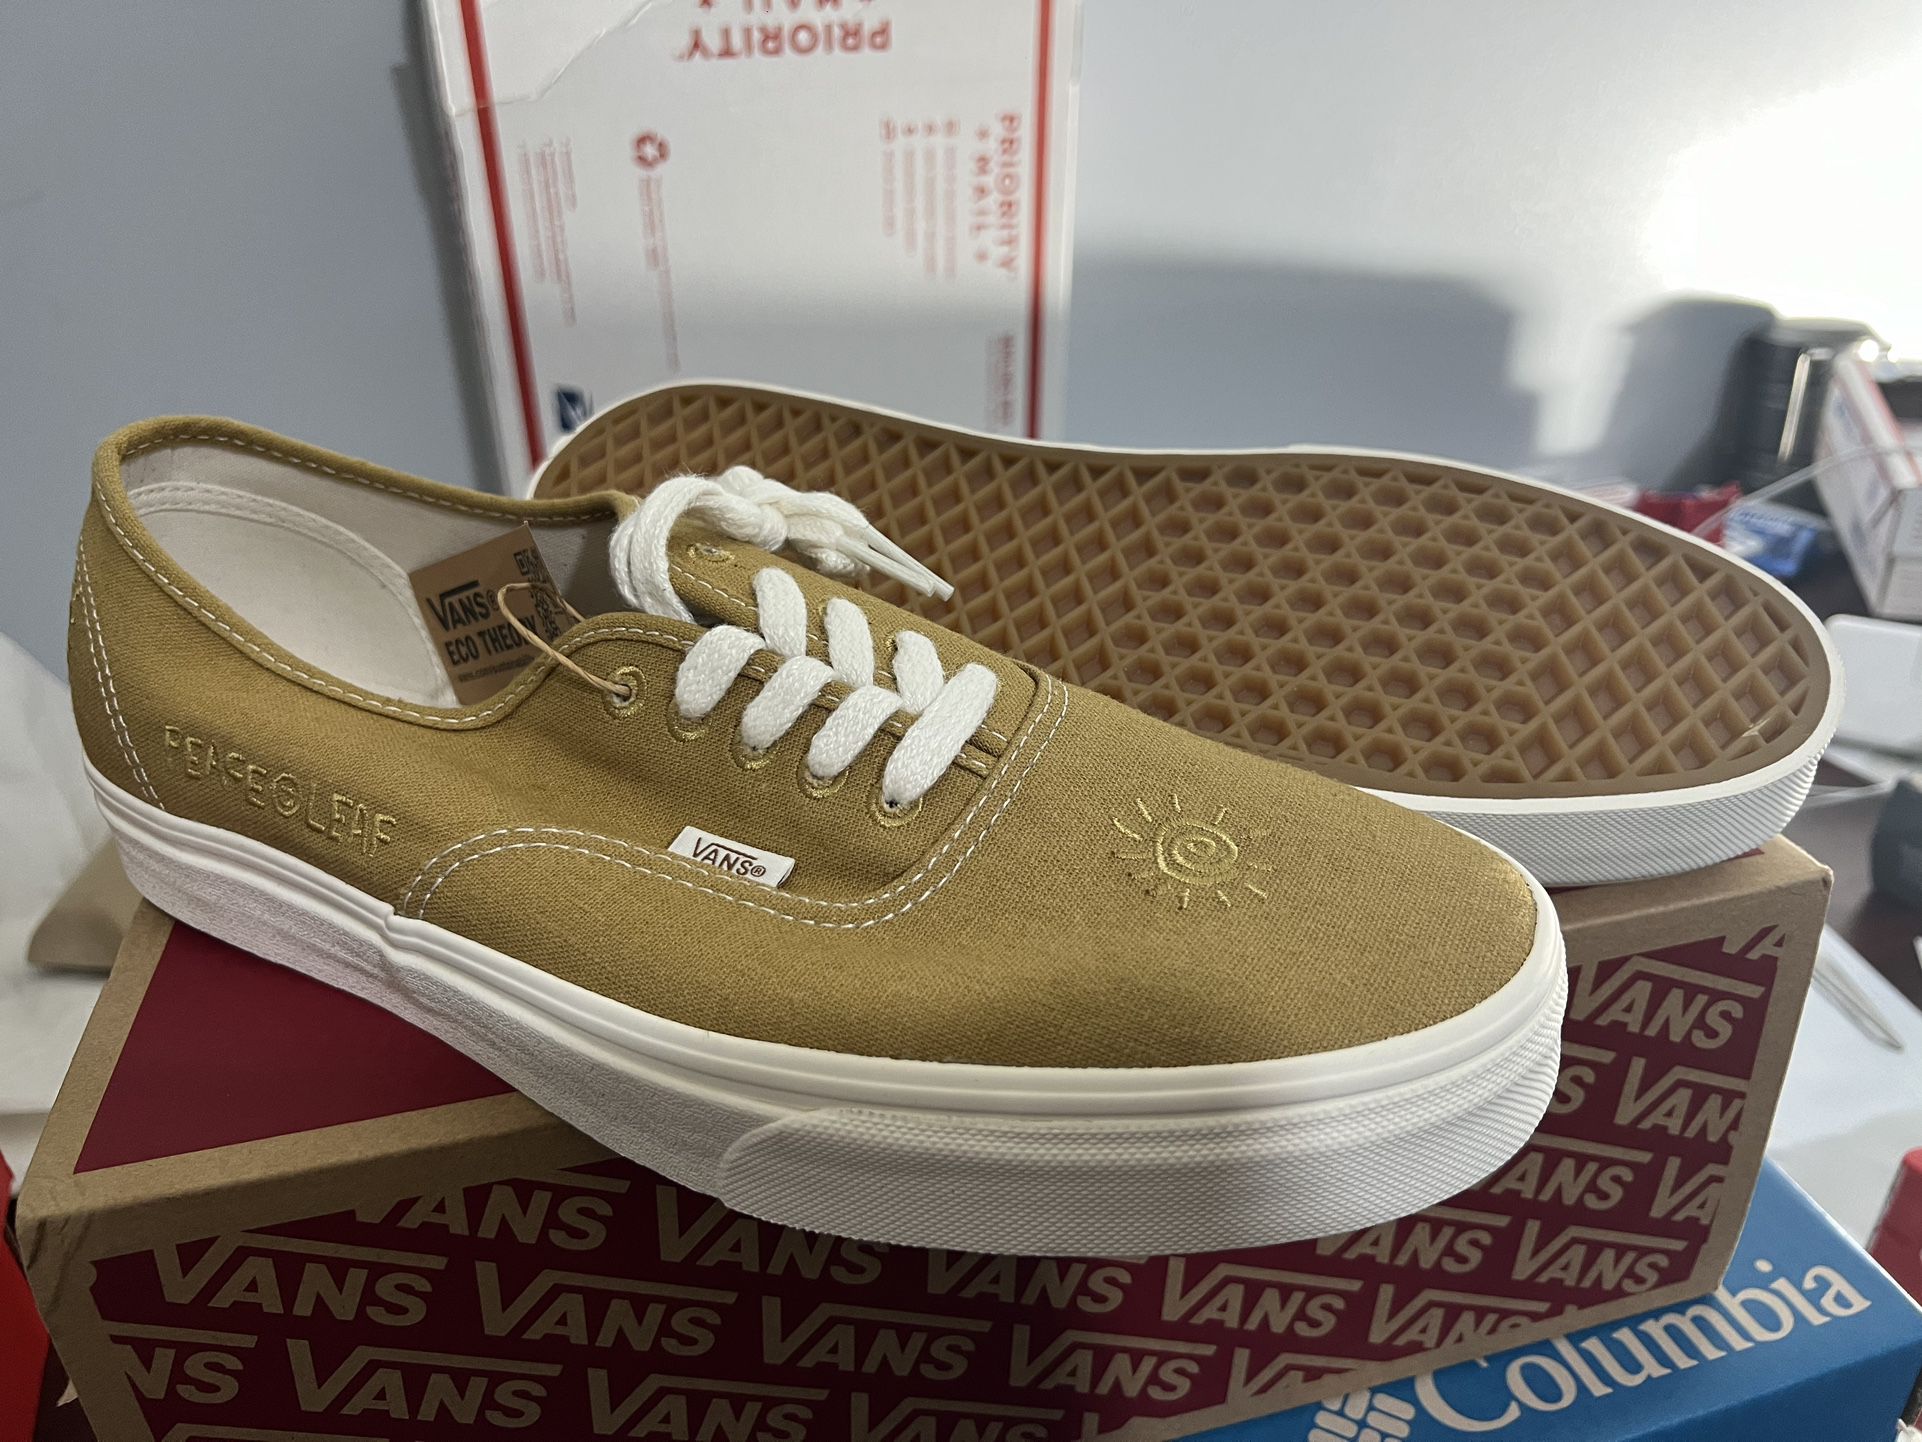 Vans men’s authentic shoes size 11 new in the box